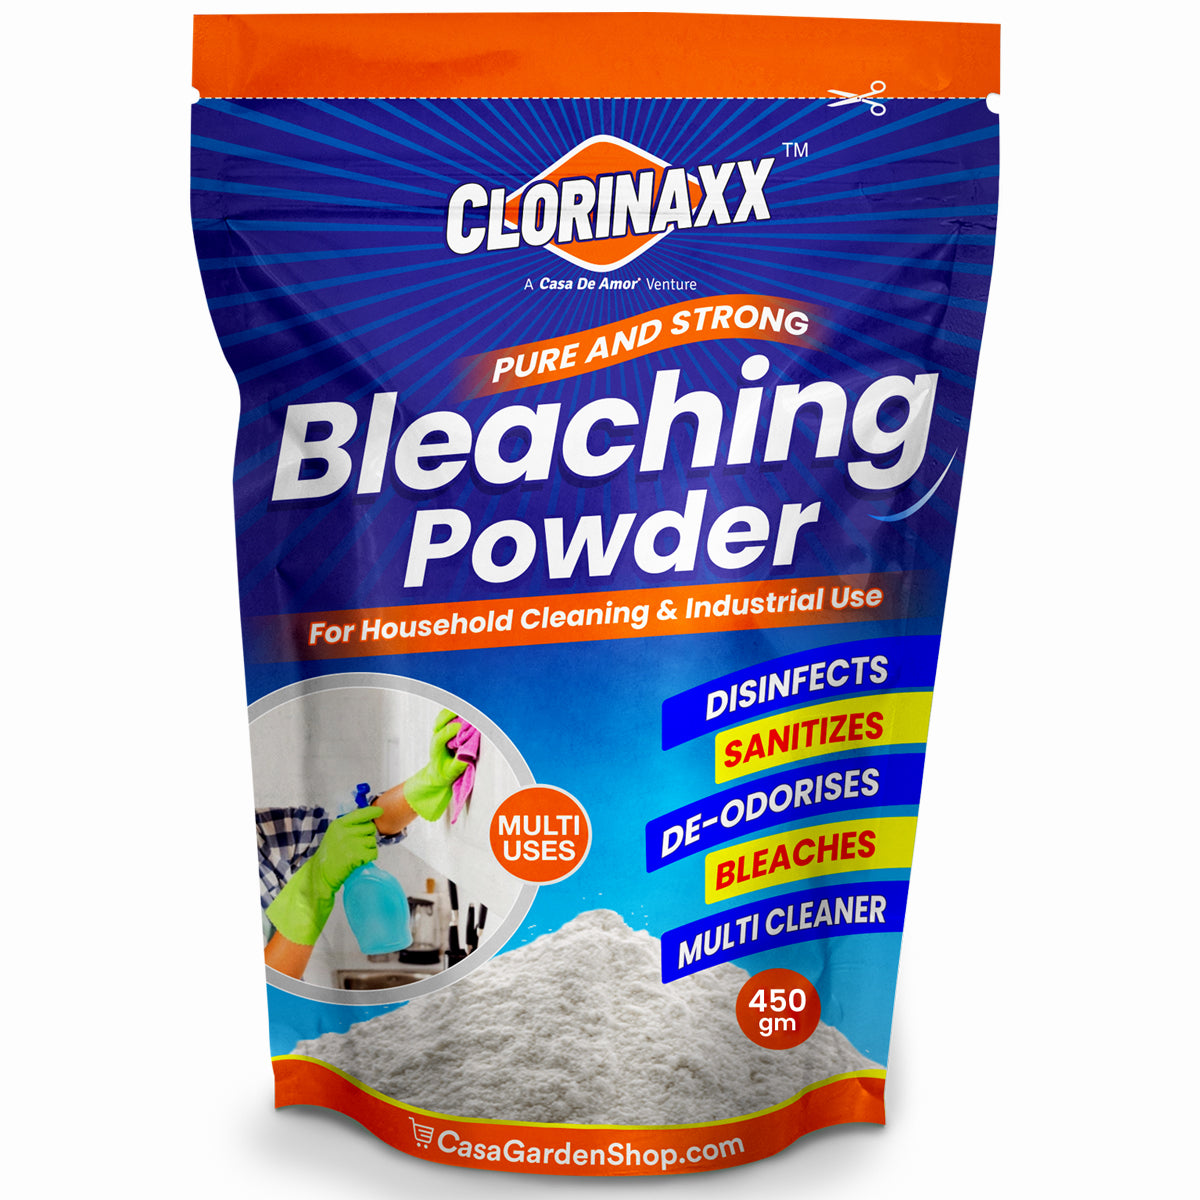 Clorinaxx Bleaching Powder For Household & Kitchen Cleaning, Disinfectant Spray to Kill Fungus, Germs, Bacteria, Floor Cleaner, Toilet Cleaner, Overhead Tank Cleaner and Multi Uses